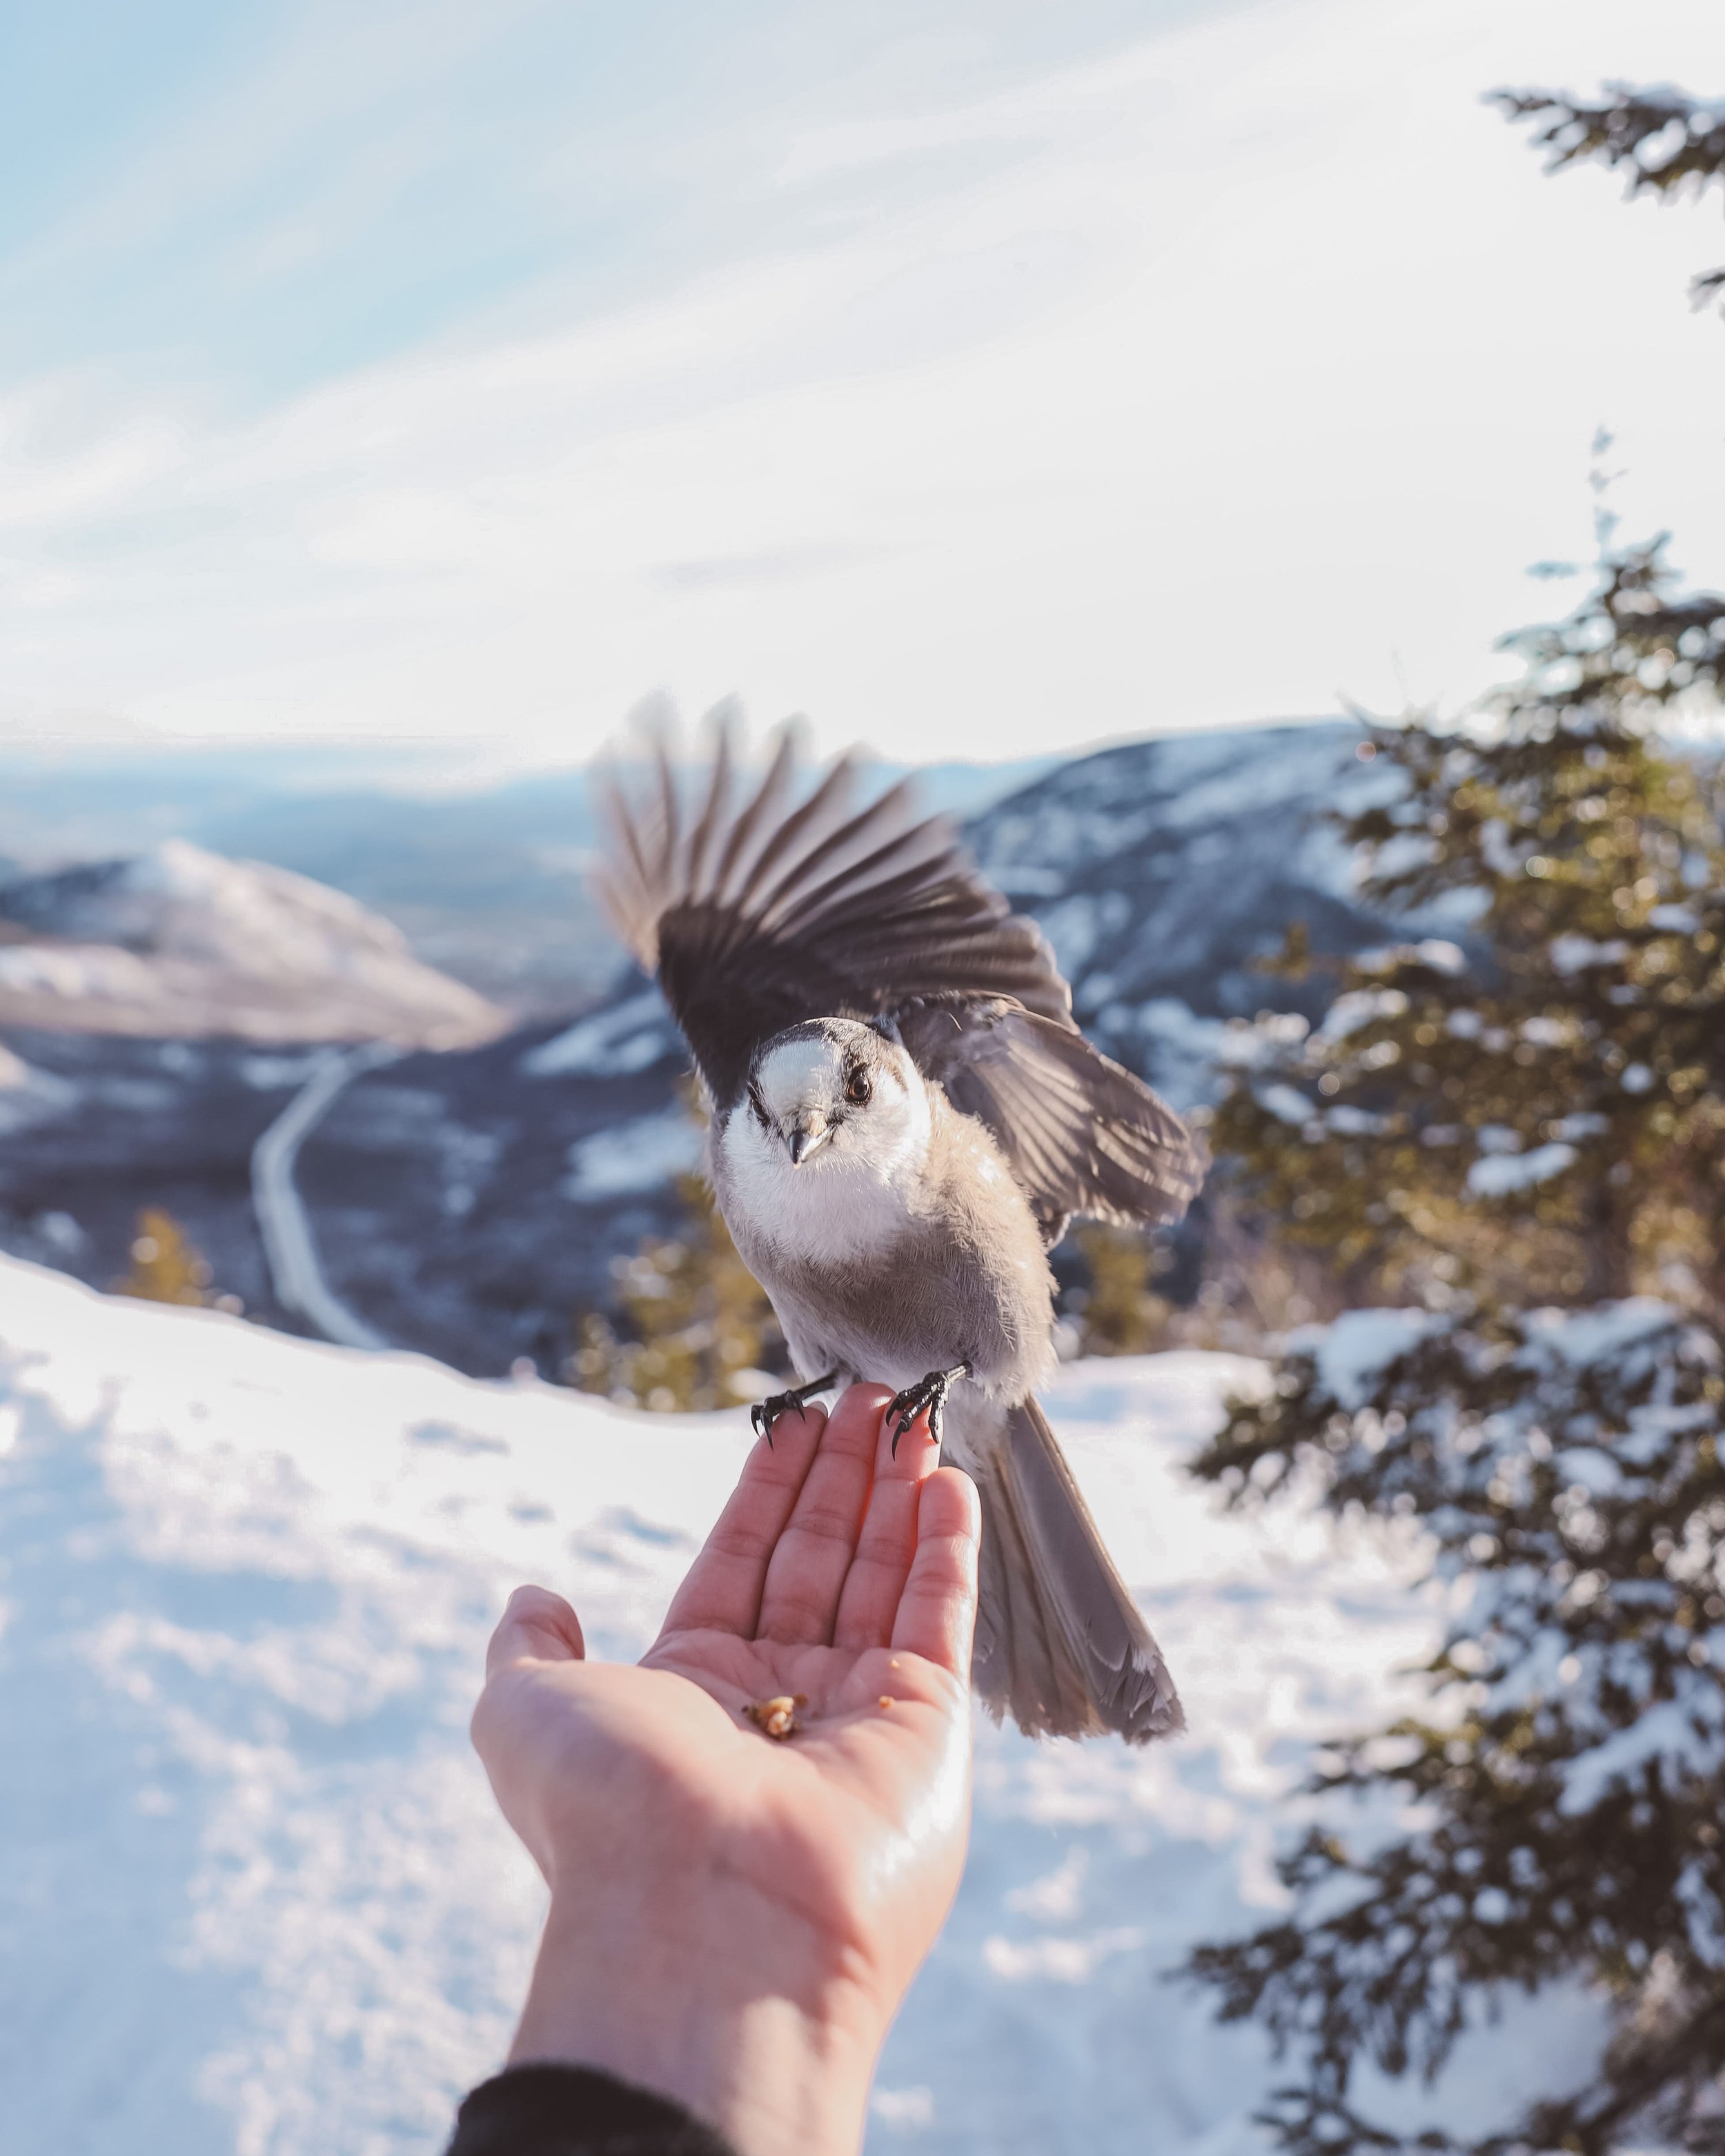 Perisoreus eating from my hand in winter - Mount du Dôme - Charlevoix - Quebec - Canada